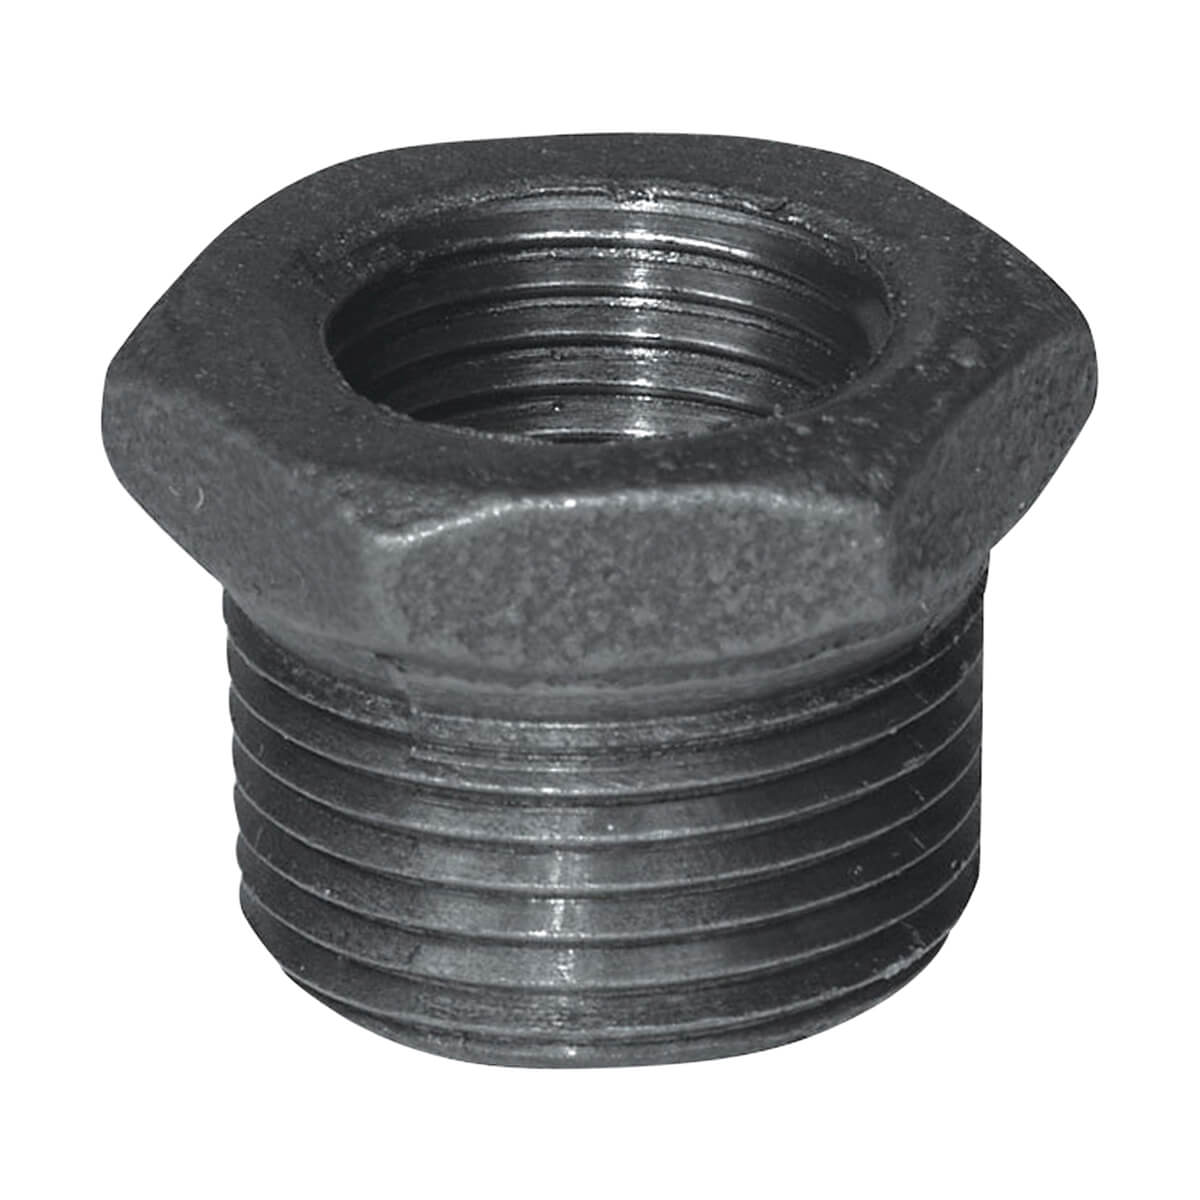 Fitting Black Iron Hex Bushing - 1/2-in x 3/8-in